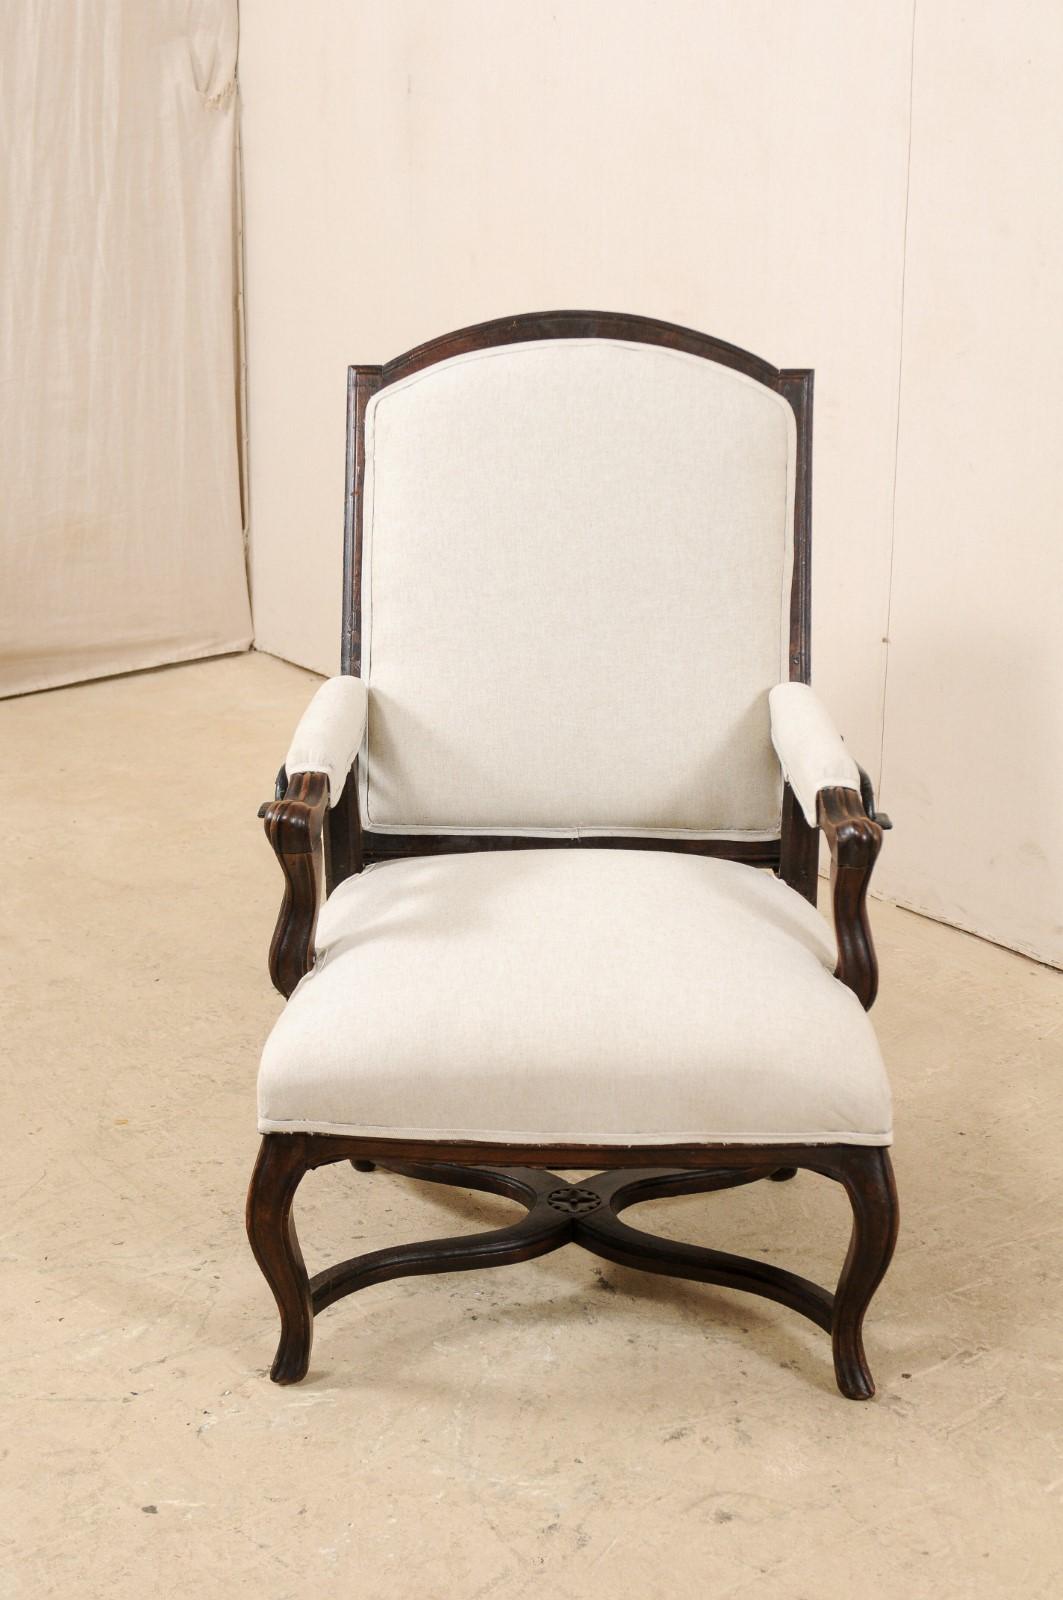 Italian 19th Century Reclining Wood and Upholstered Armchair In Good Condition For Sale In Atlanta, GA